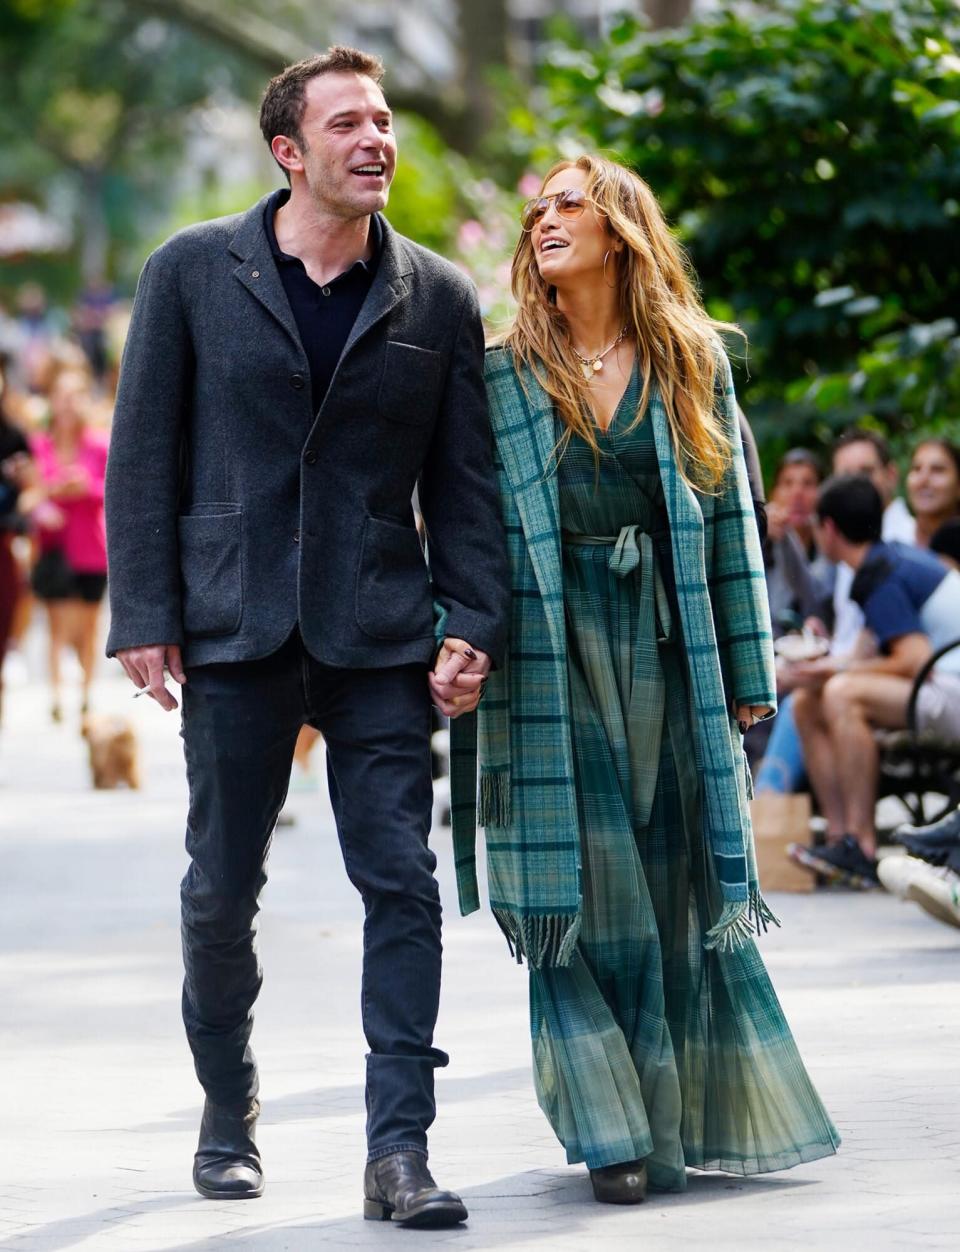 Jennifer Lopez and Ben Affleck are seen on September 26, 2021 in New York City